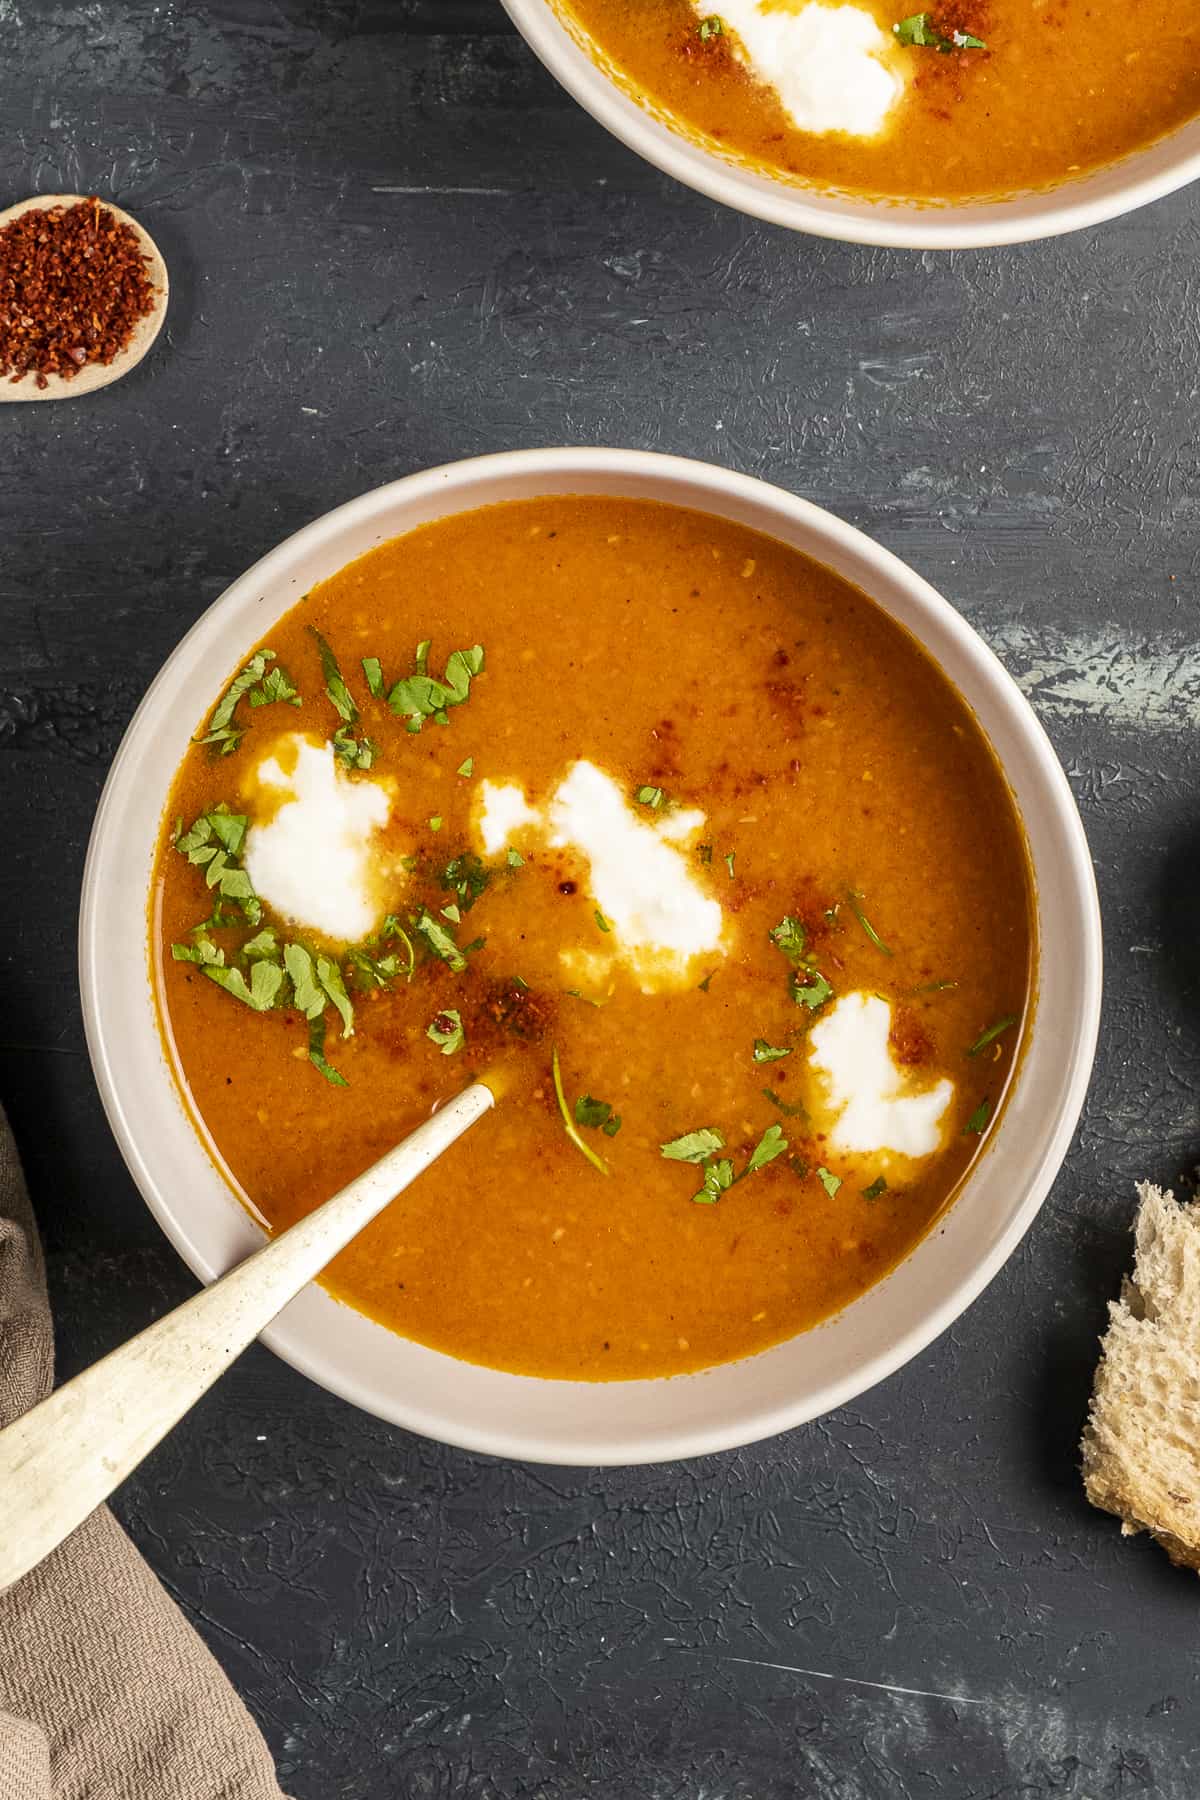 Tomato and carrot soup garnished with yogurt, parsley and red pepper flakes in a white bowl and a spoon inside it.